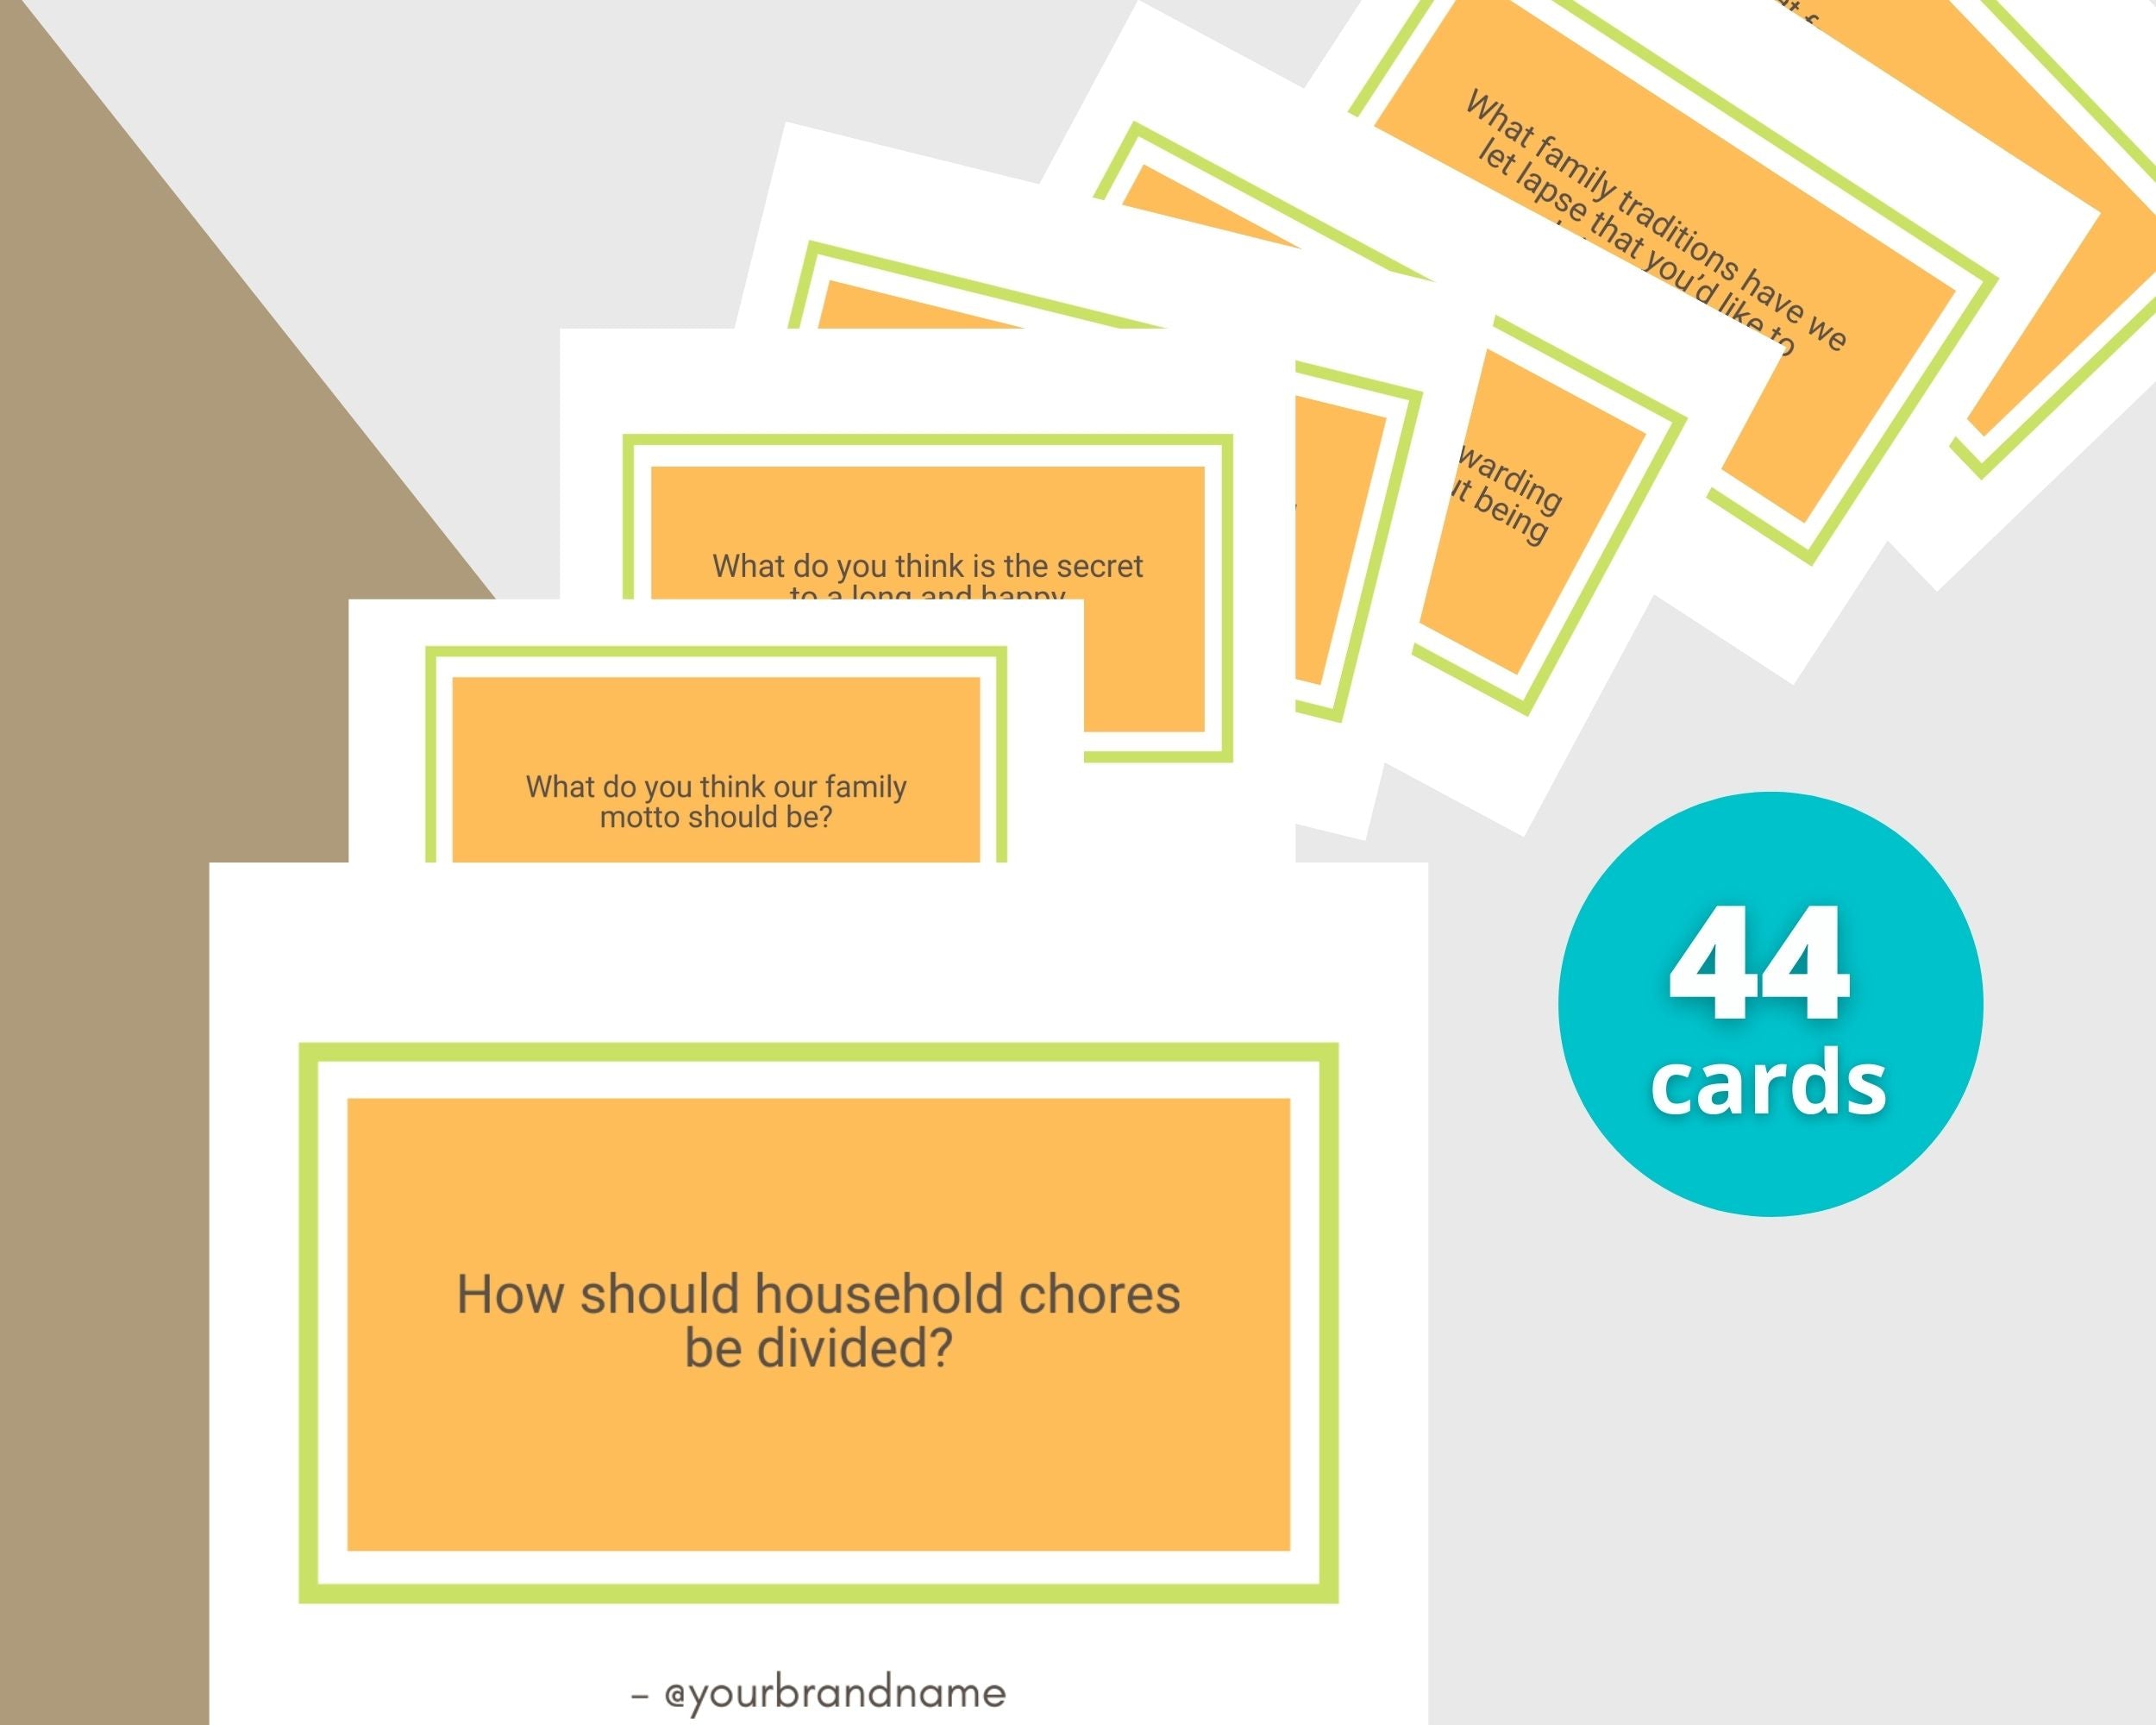 44 Questions Family Edition Cards | Canva Inspirational Cards | Commercial Use